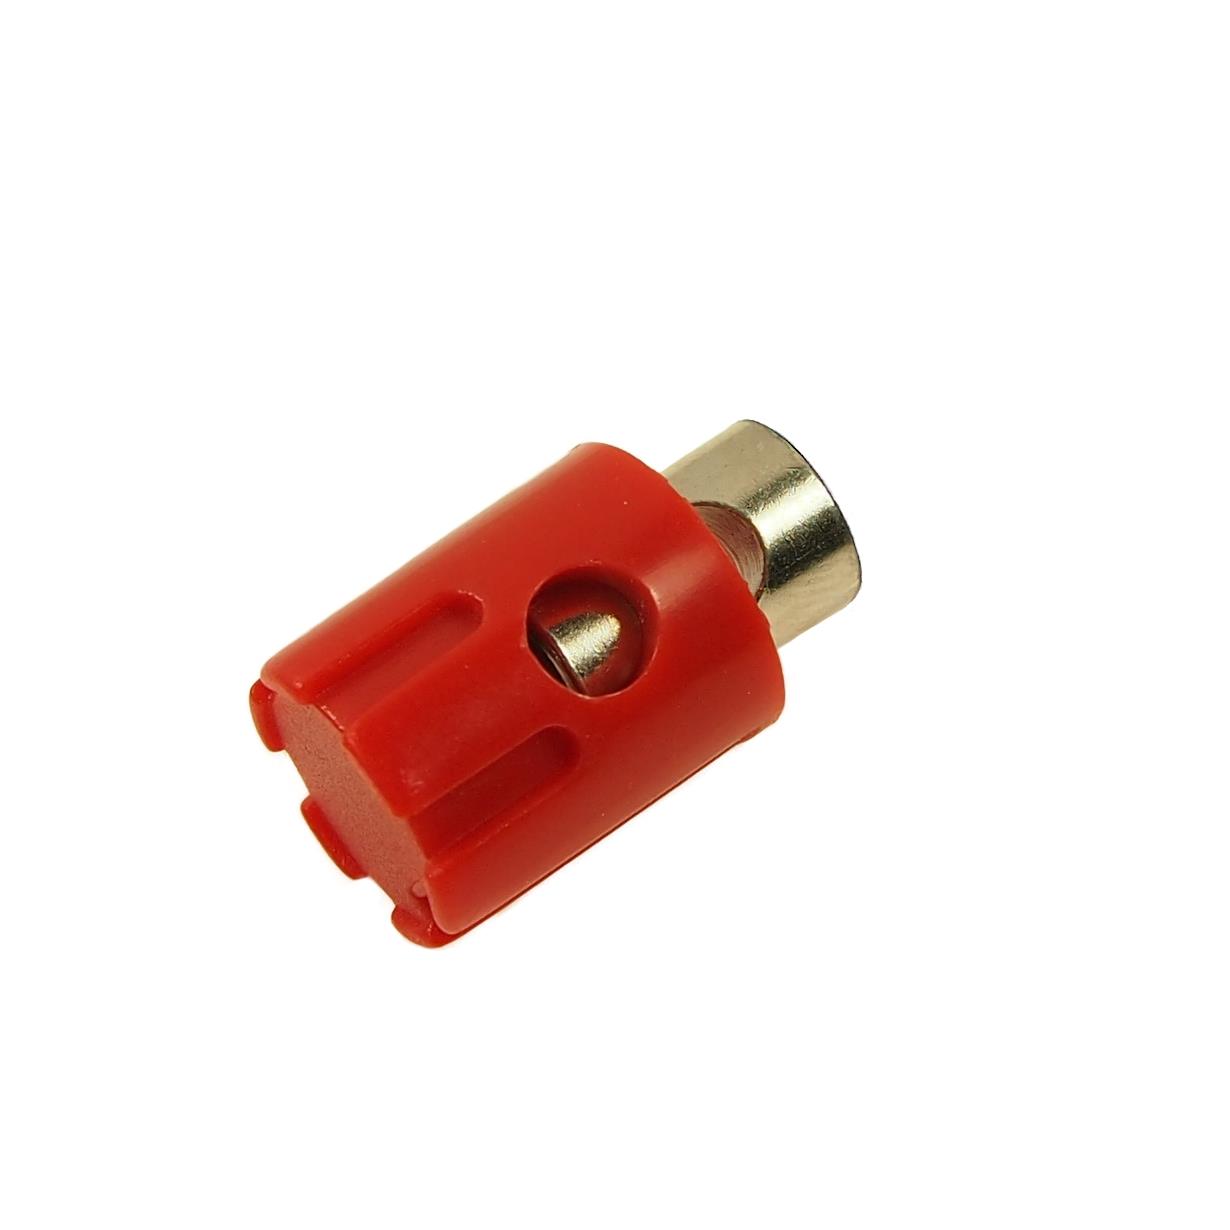 【CL681580】CONN BIND POST FLUTED RED